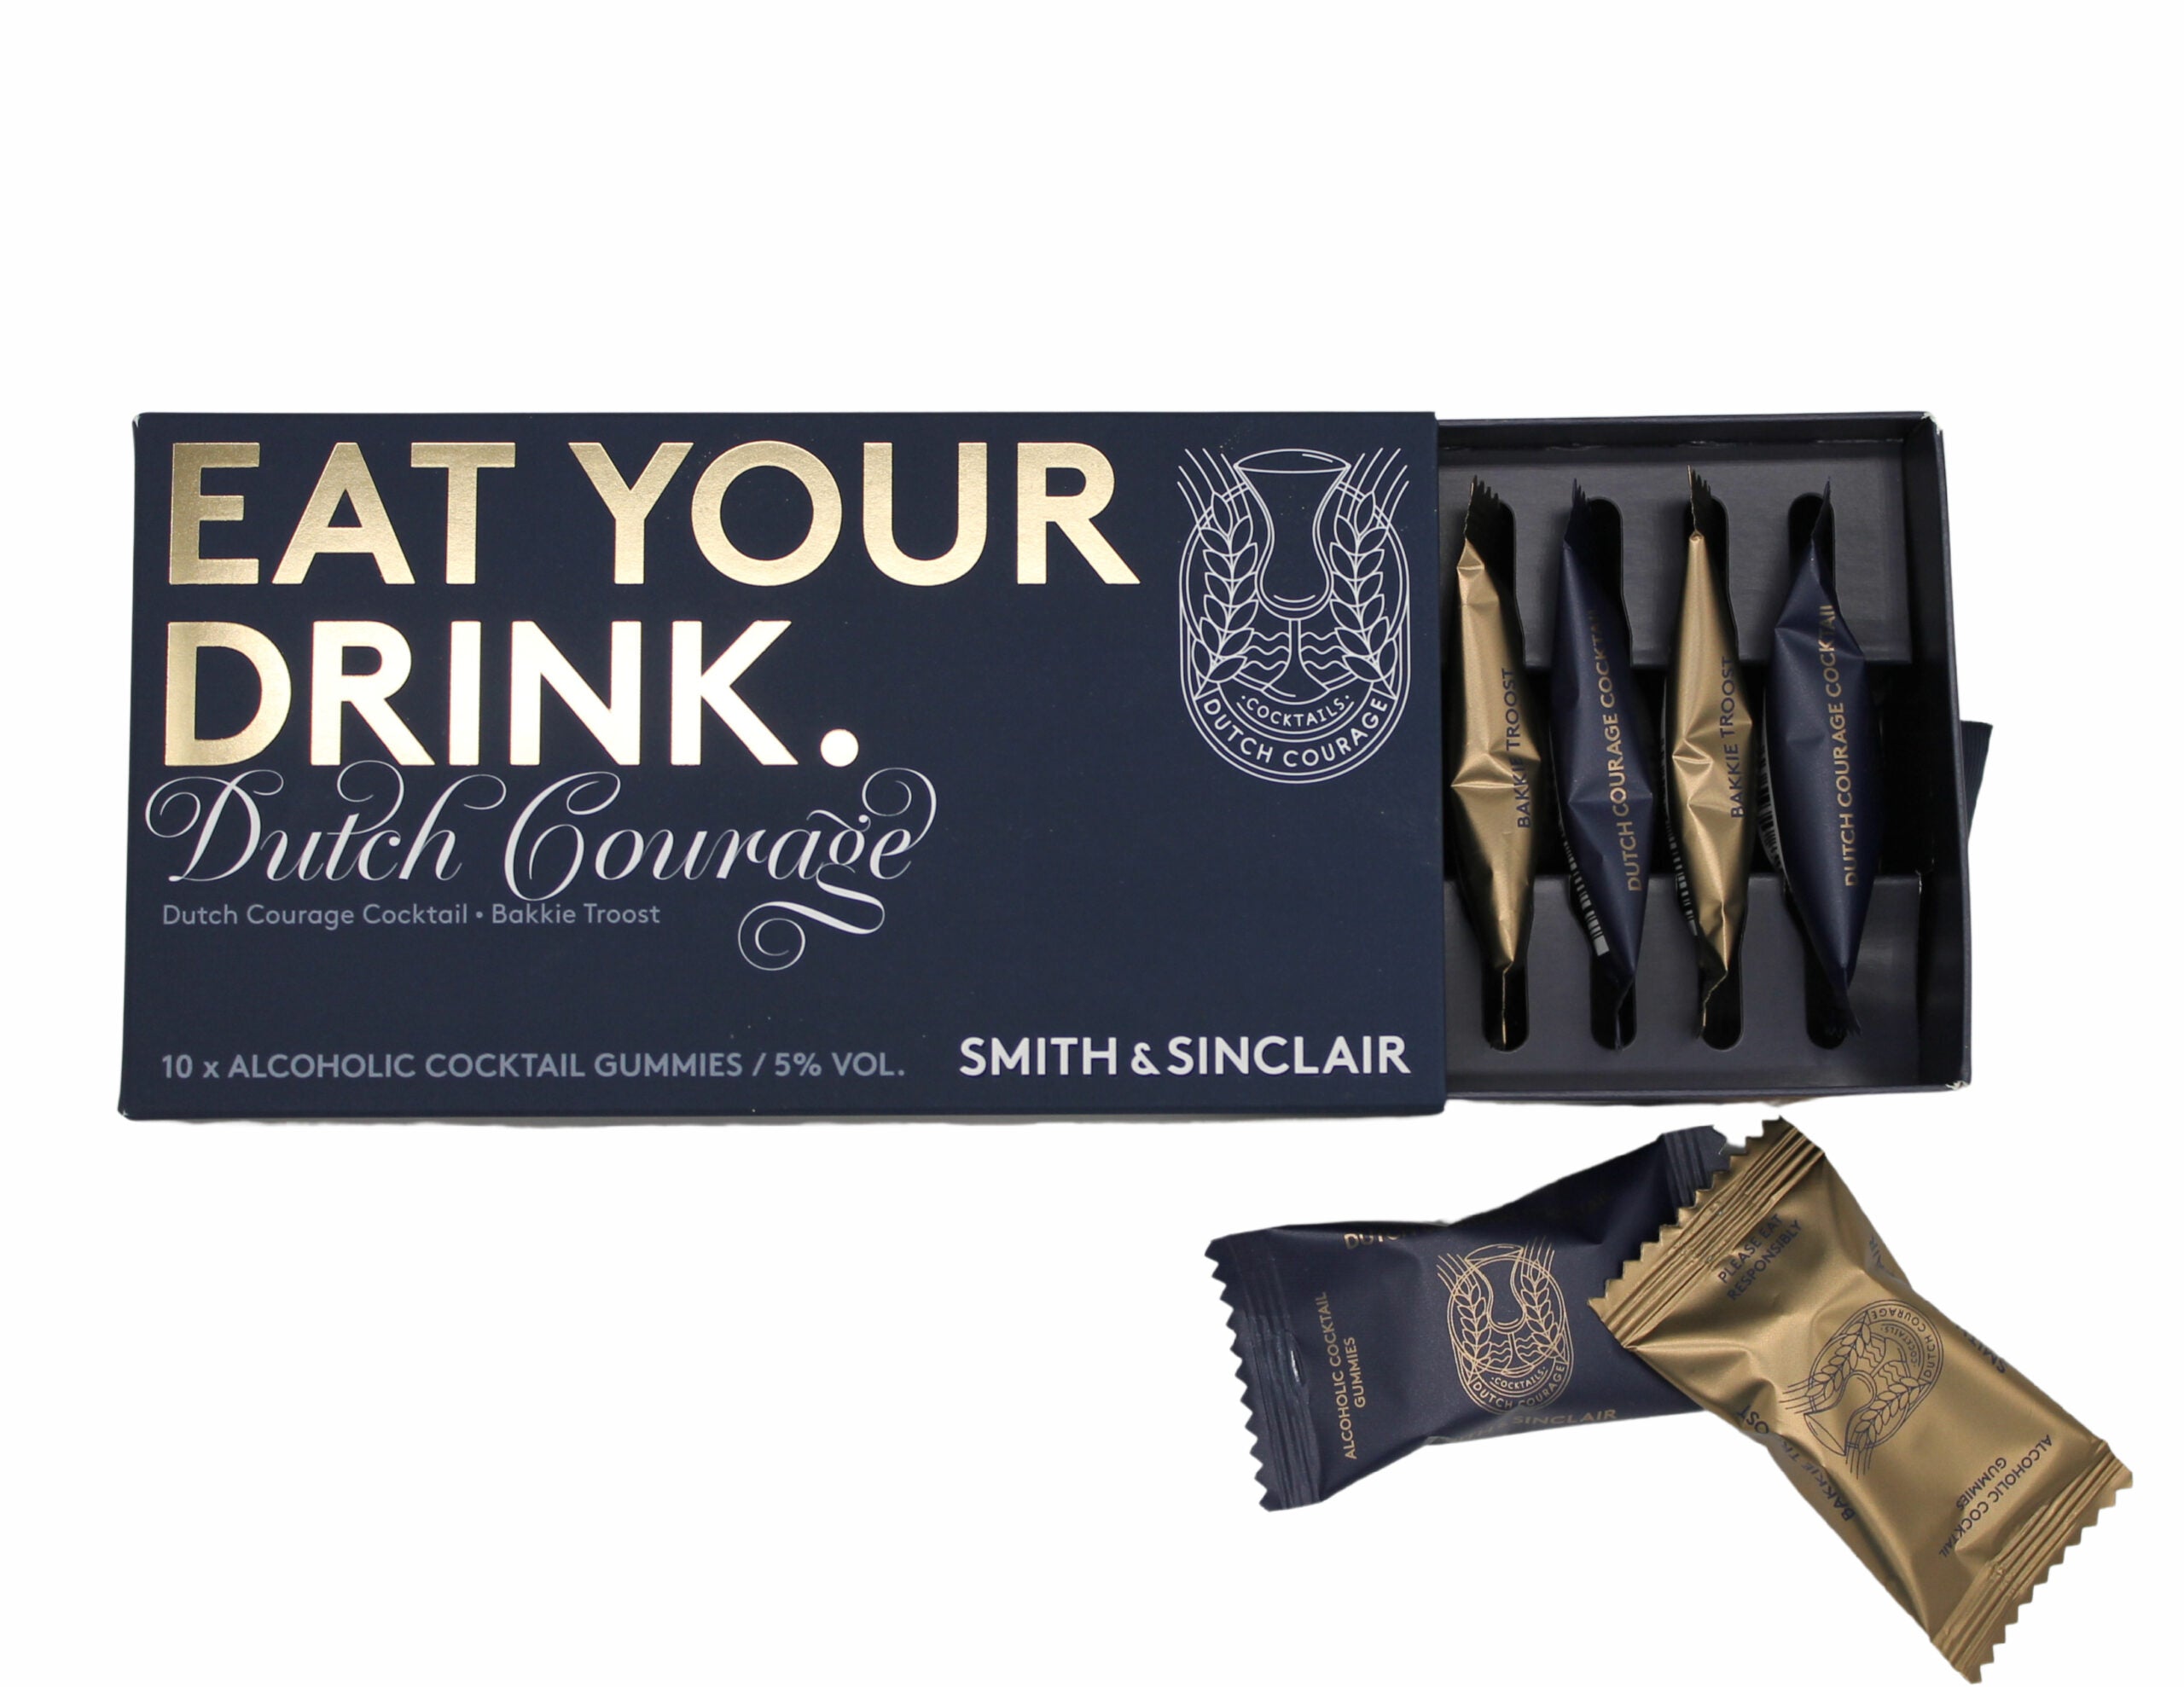 Eat Your Drink: Dutch Courage Cocktails